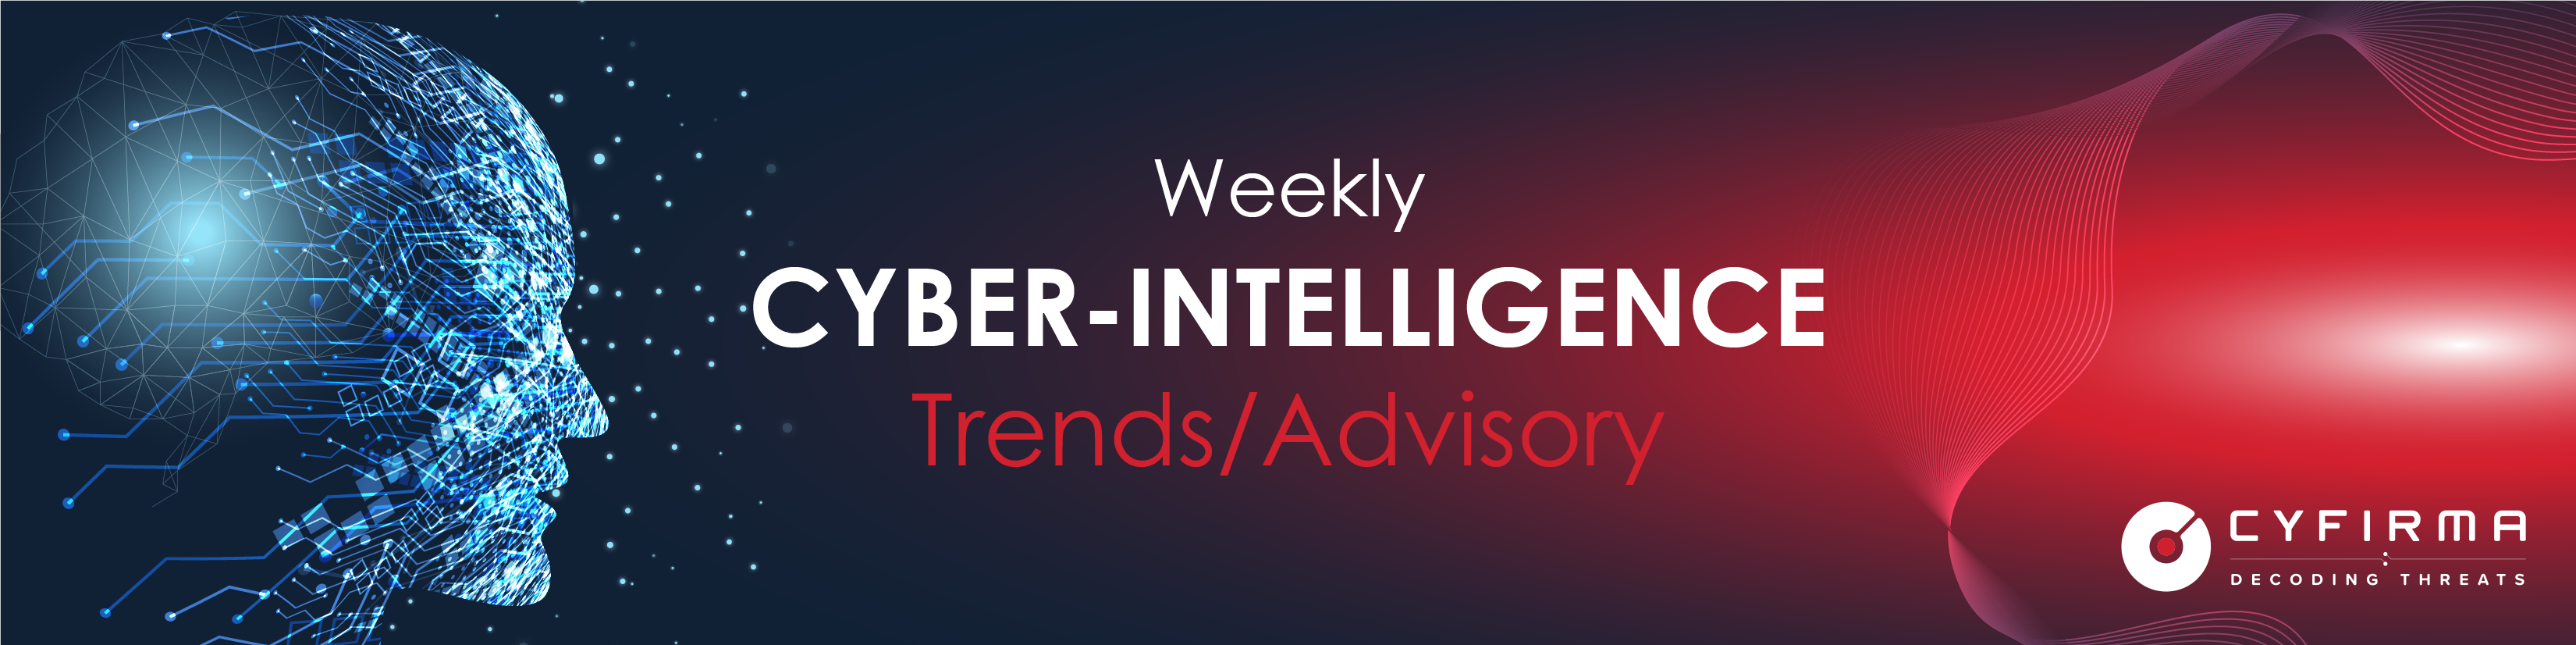 Weekly Cyber-Intelligence Trends and Advisory – 6 Mar 2022